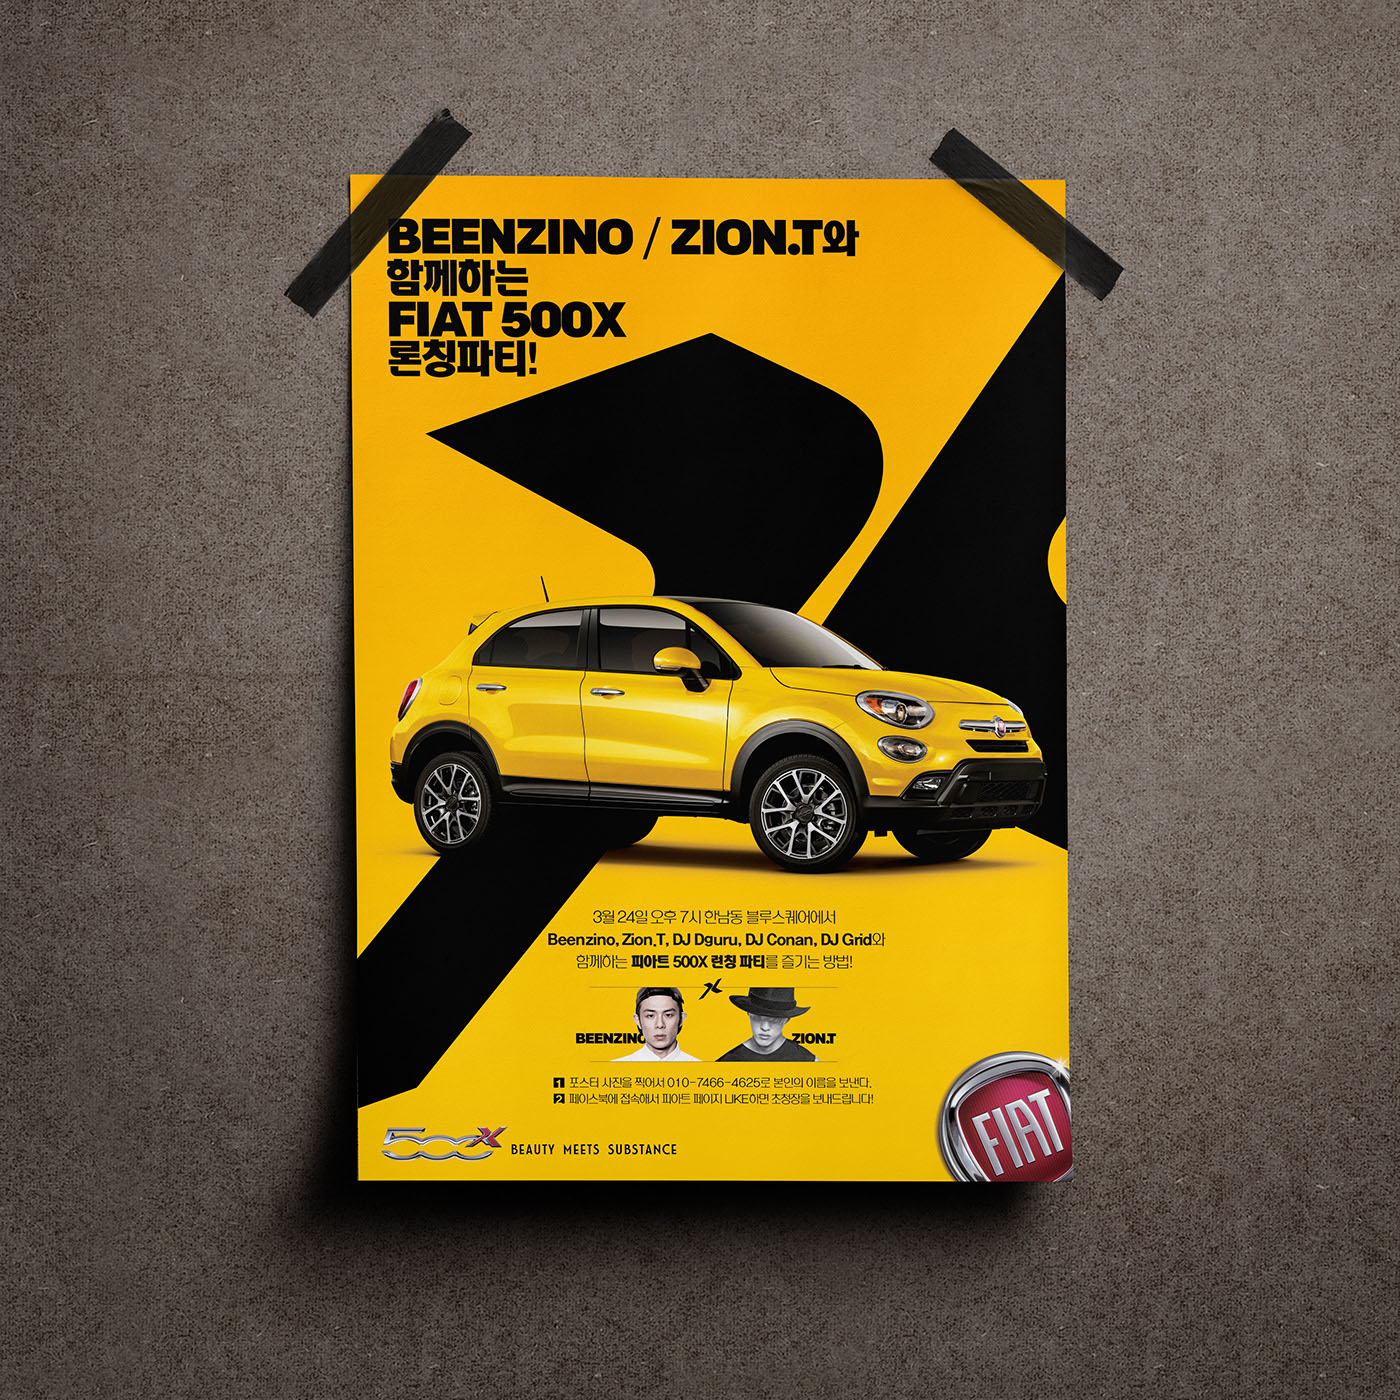 ad Advertising  Launching poster print fiat car graphic ILLUSTRATION  information design